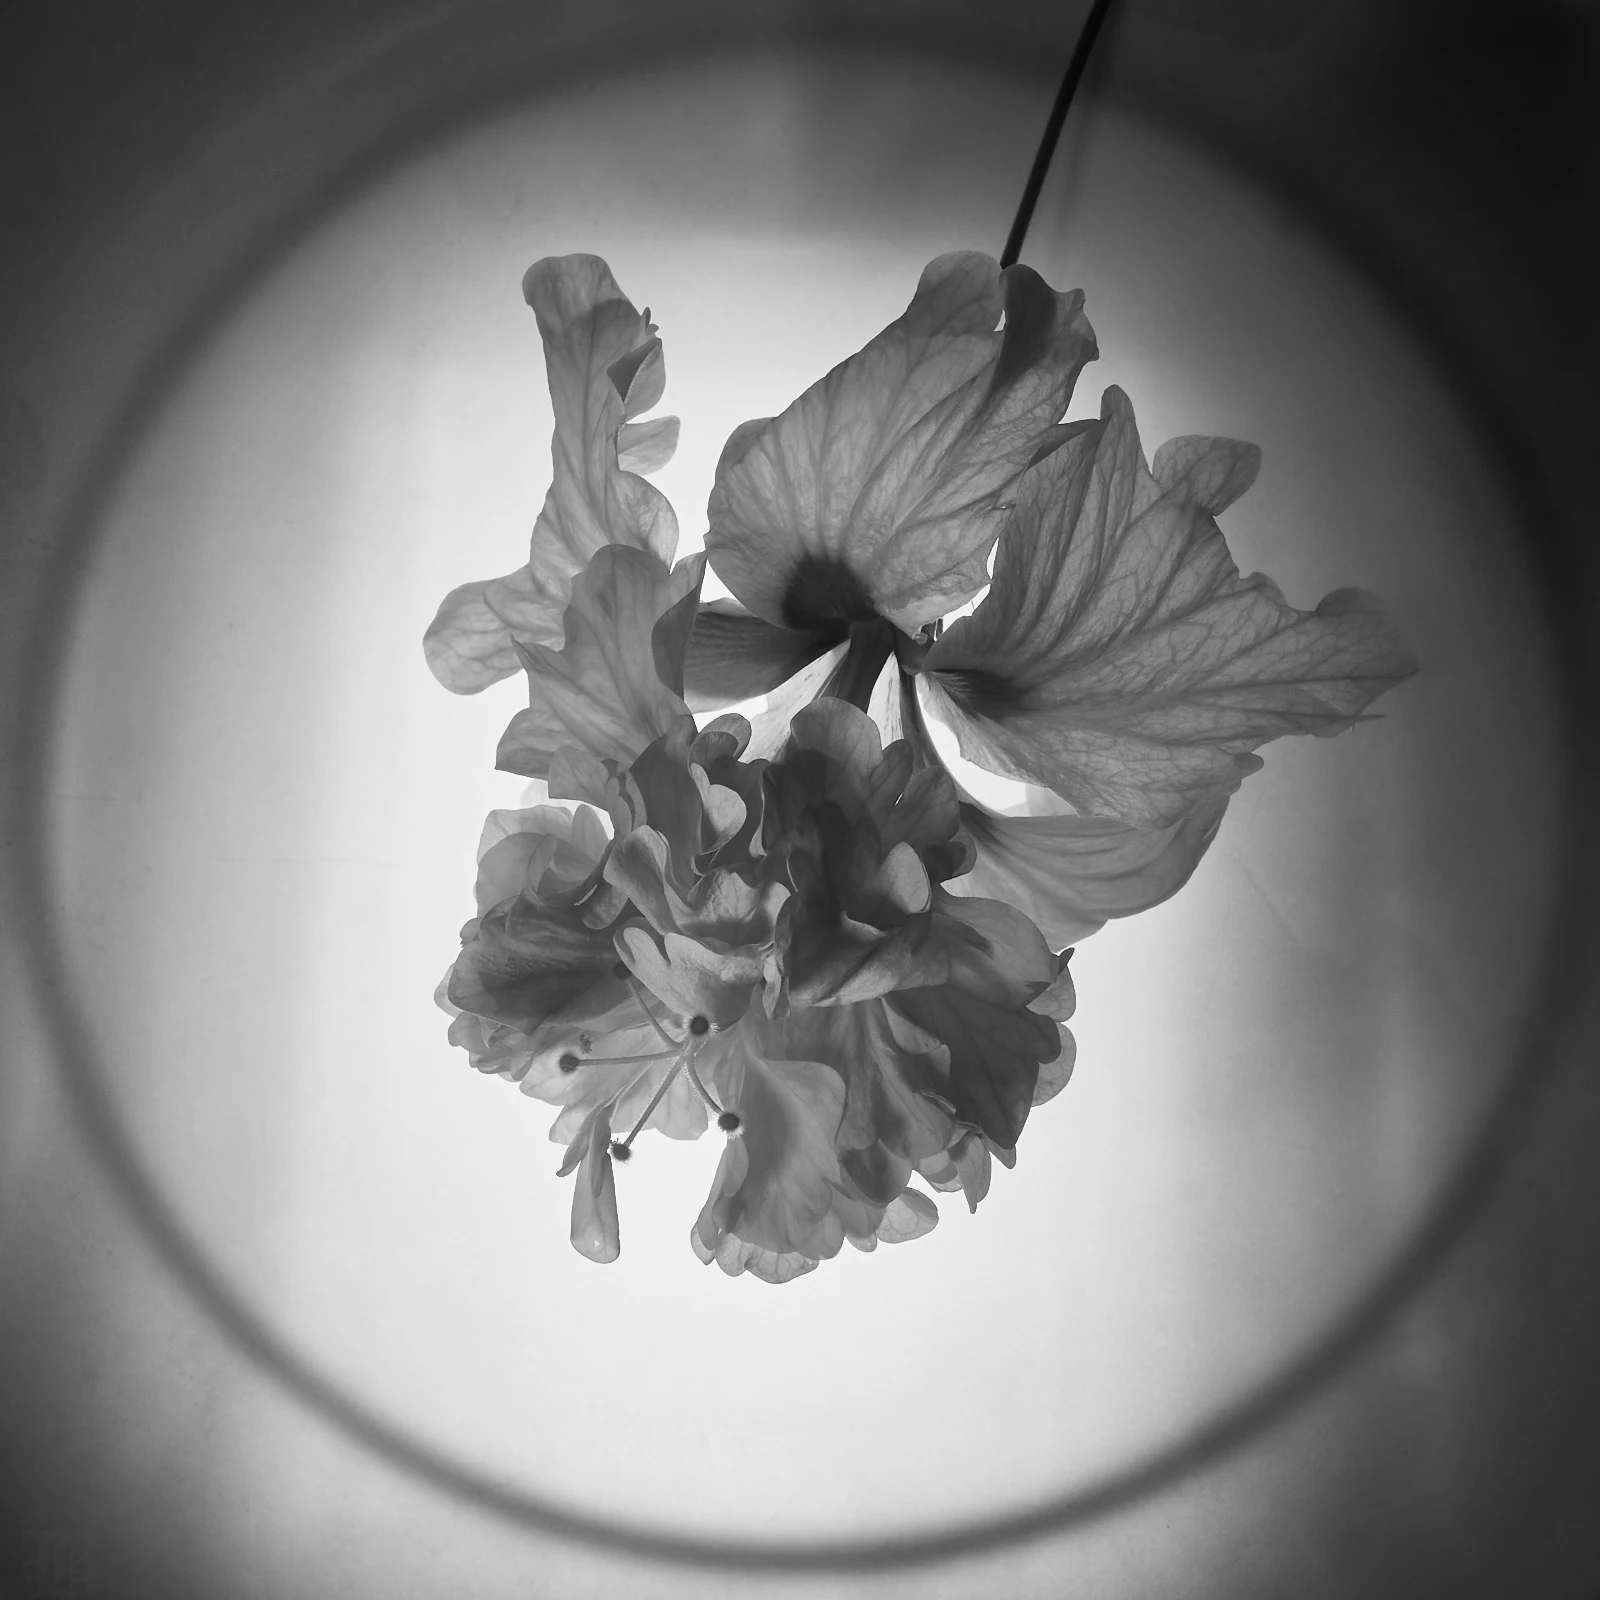 The Hibiscus is back-lit through a plastic dinner plate. I chose Black & White to highlight the contours and shadings found within the Hibiscus. 